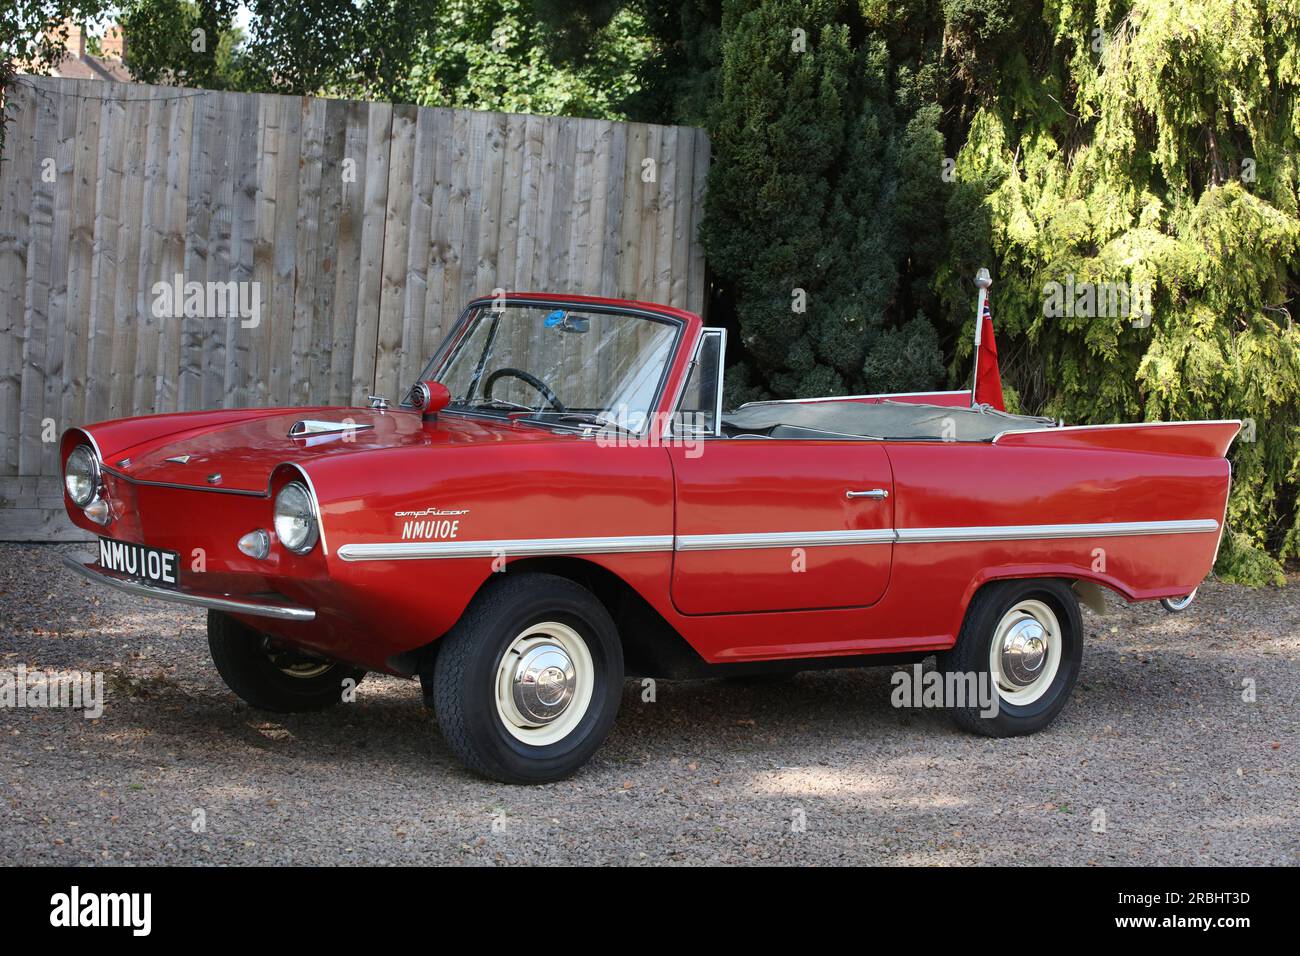 A red Amphicar Stock Photo